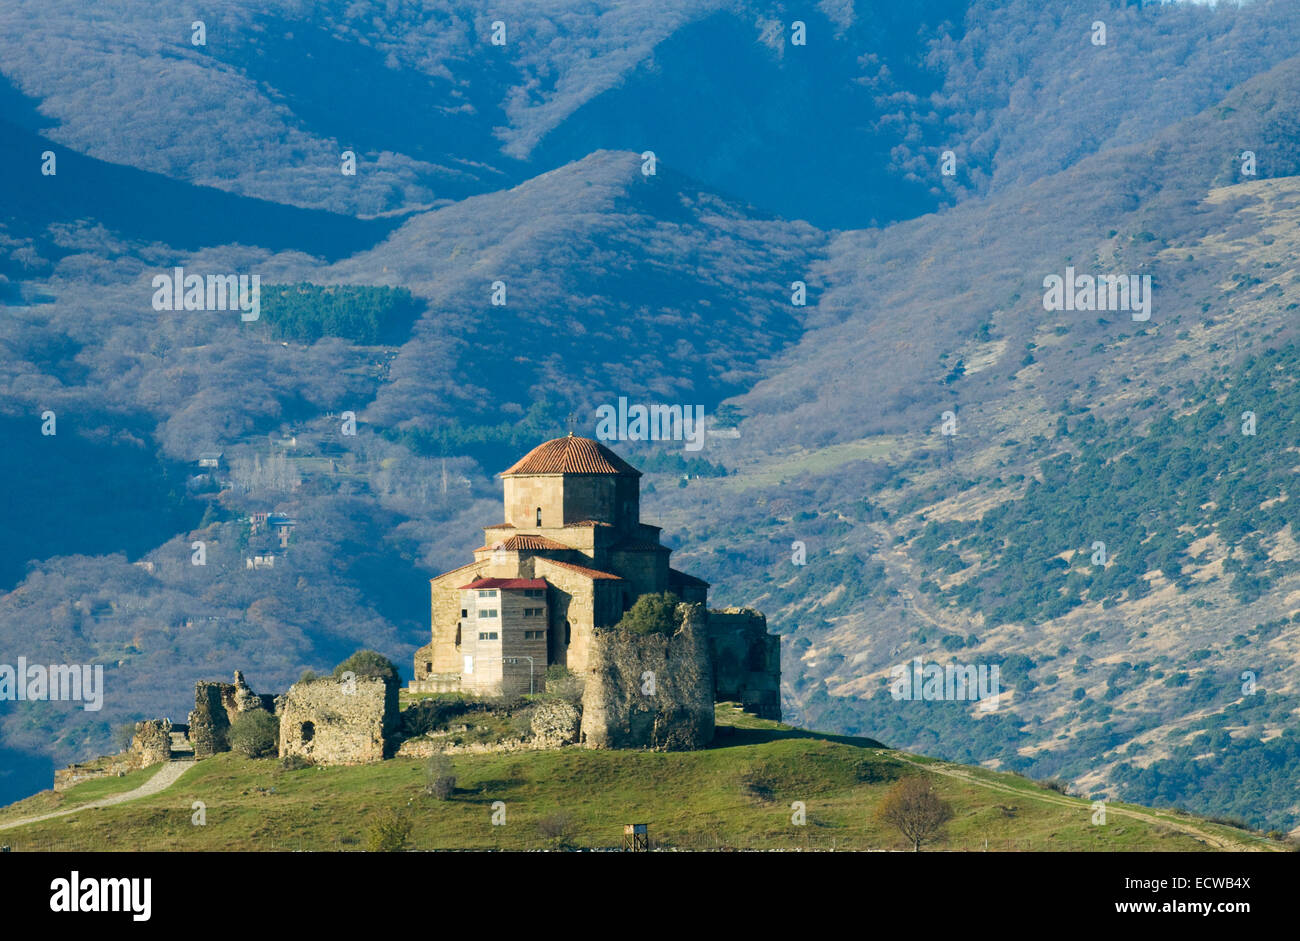 Famous Jvari church is situated on the mountain top and surrounded with mountains. Stock Photo